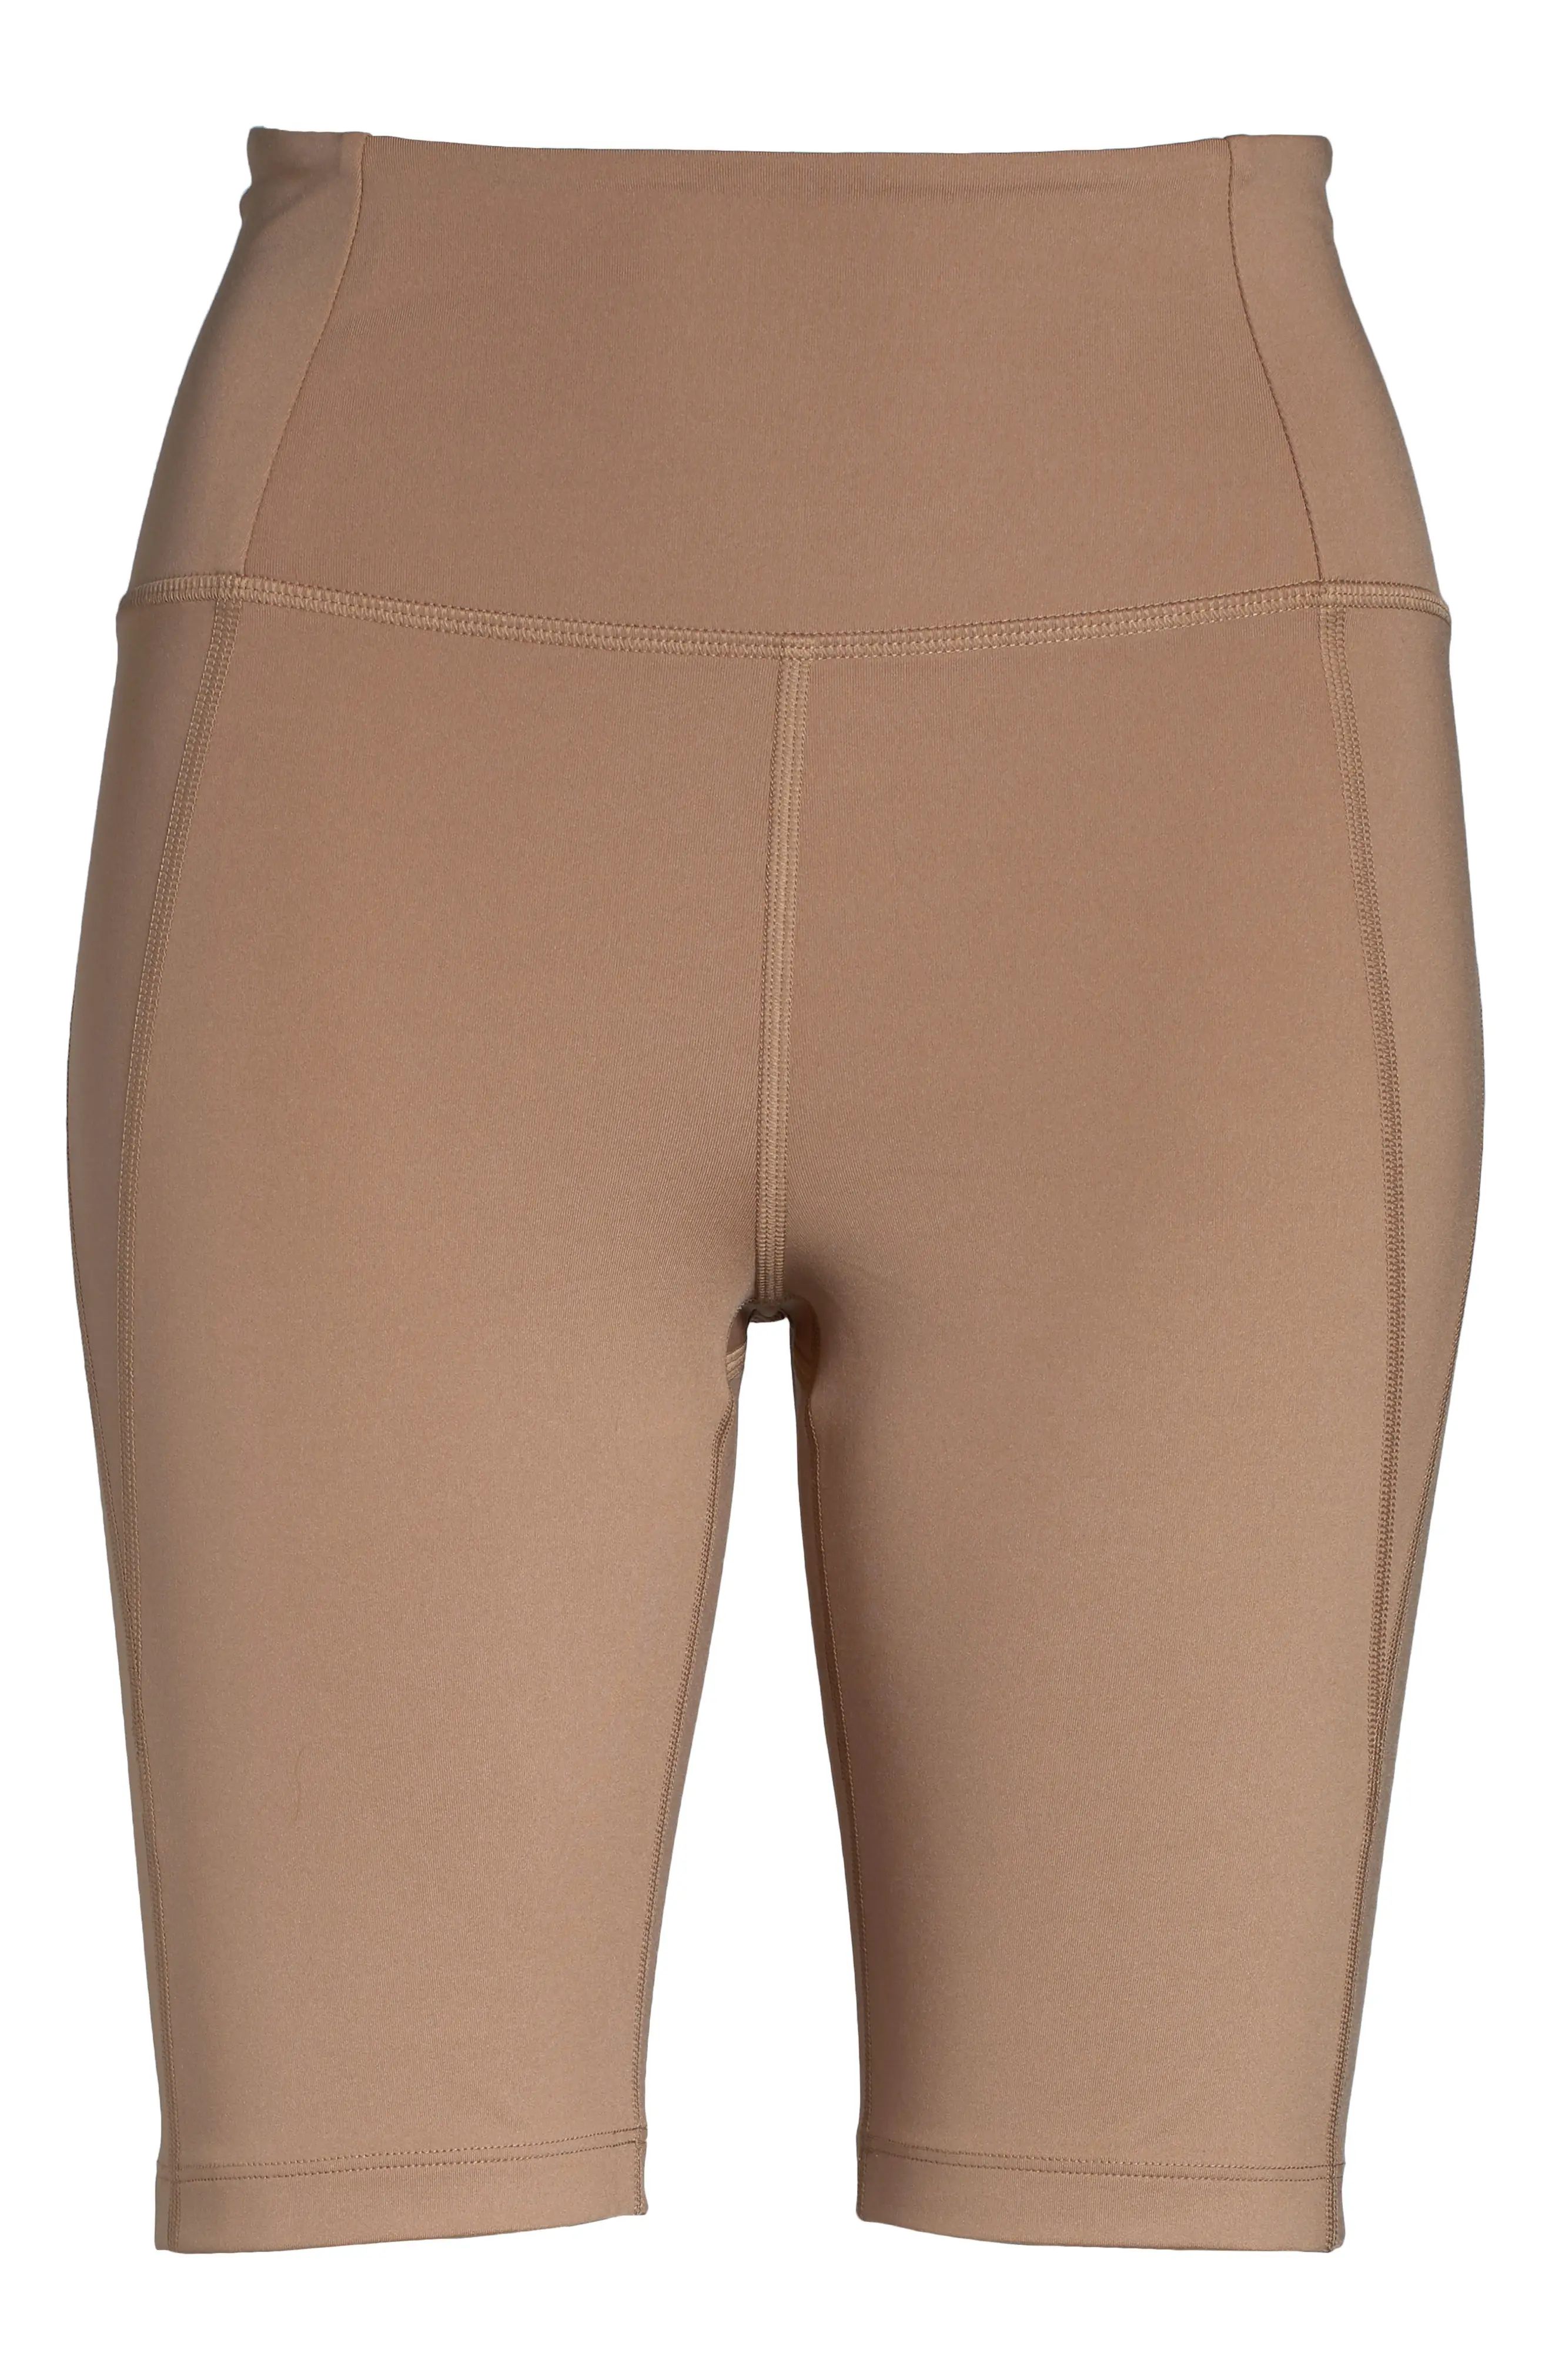 Girlfriend Collective High Waist Bike Shorts, Size X-Small in Brownie at Nordstrom | Nordstrom